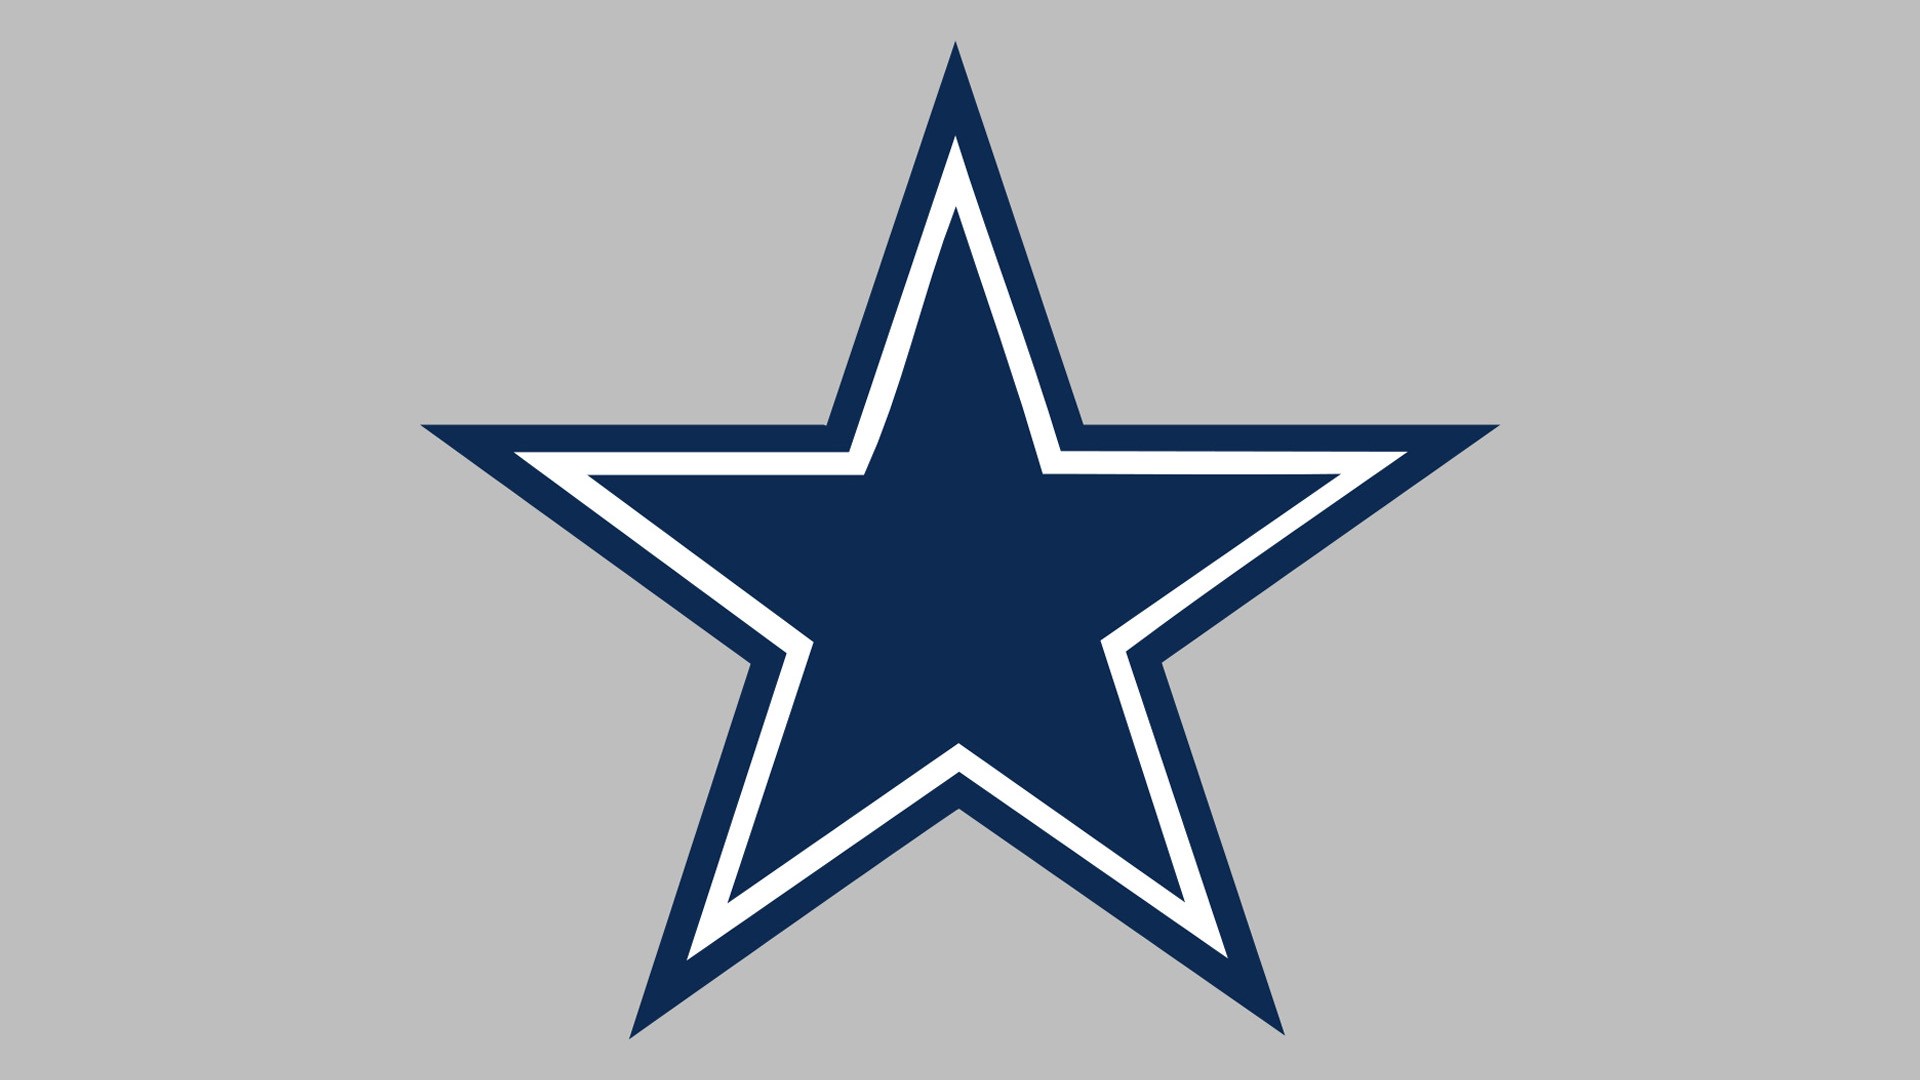 Dallas Cowboys Wallpaper For Mac Backgrounds With Resolution 1920X1080